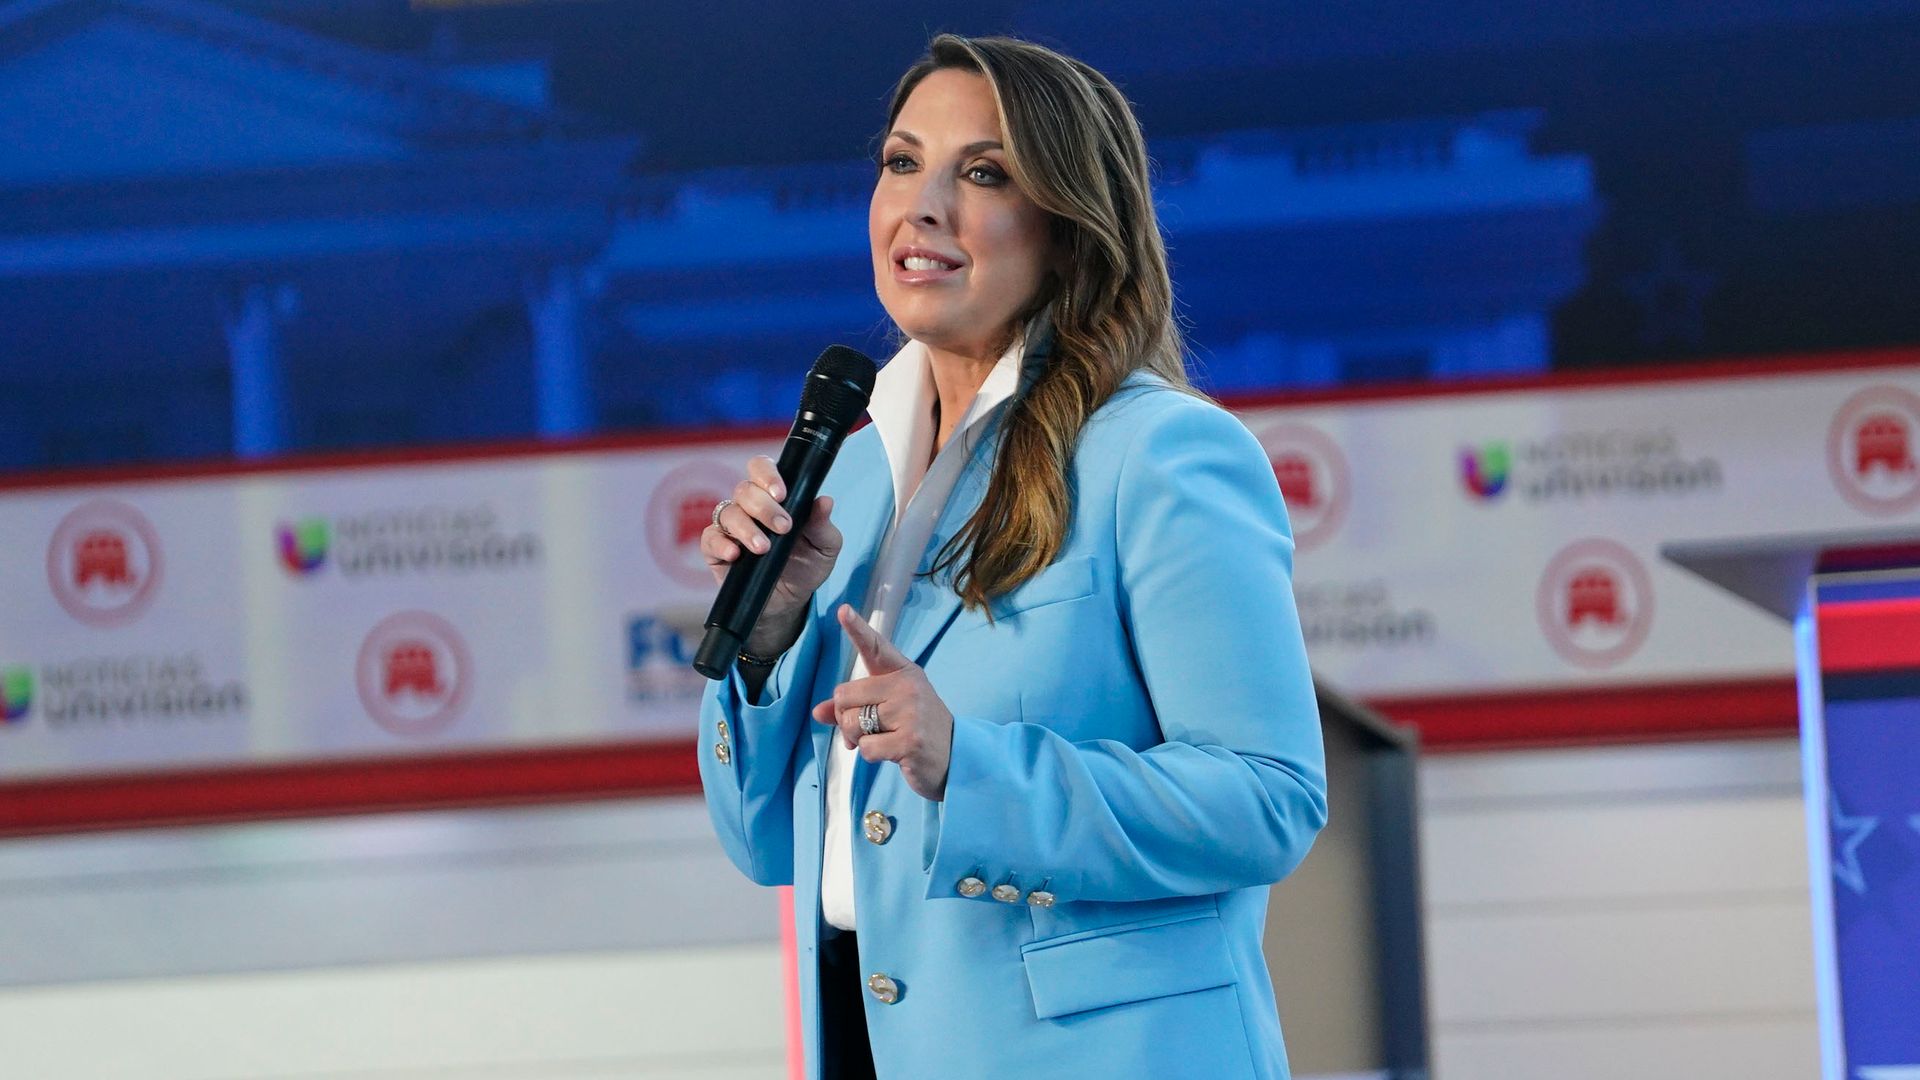 Why did NBC reconsider Ronna McDaniel's hiring only after facing significant backlash from network stars like Chuck Todd and Rachel Maddow?